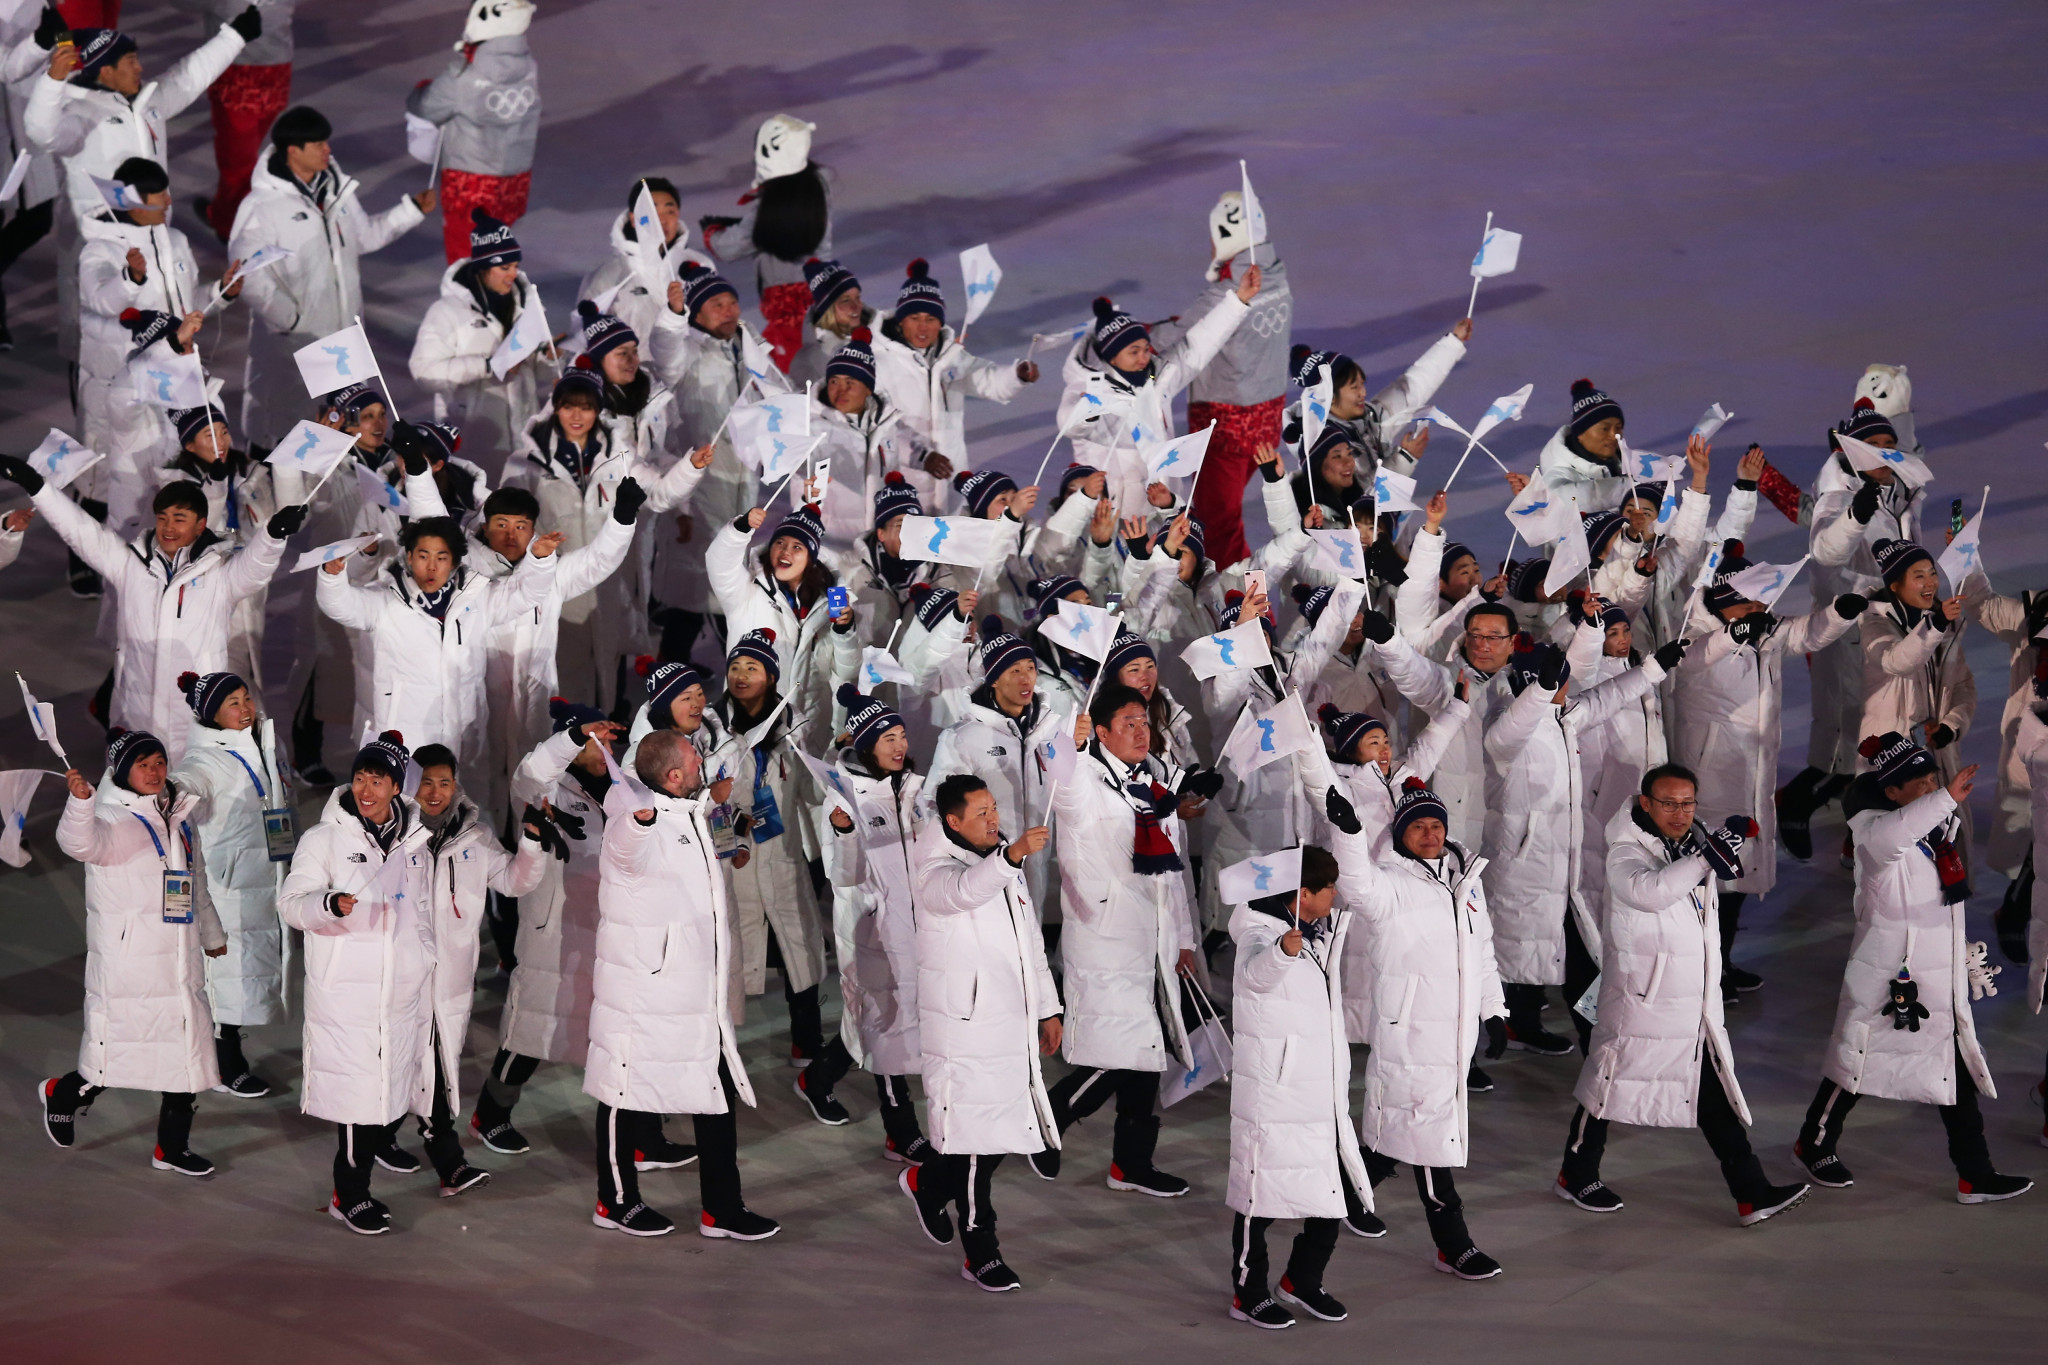 Athletes from North and South Korea marched together at the Pyeongchang 2018 Opening Ceremony today ©Getty Images